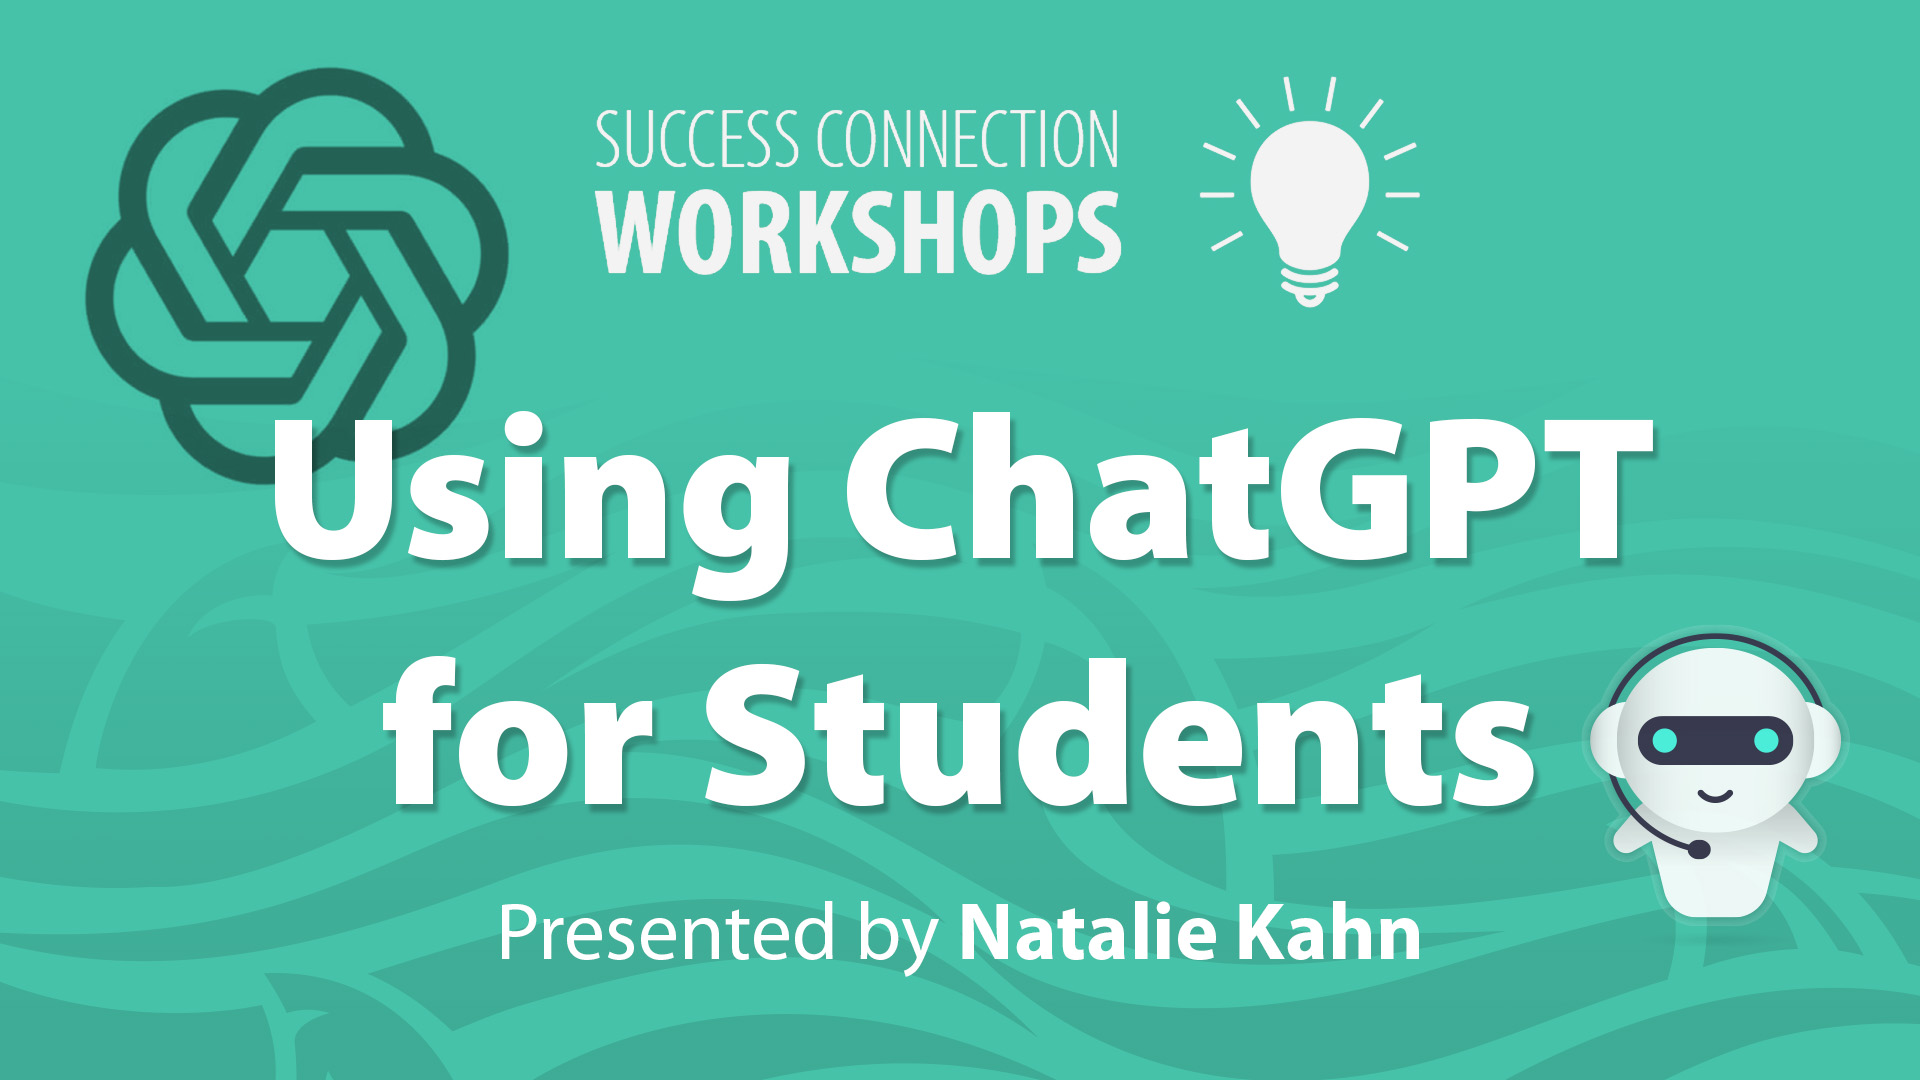 Success Connection Workshops Using ChatGPT for Students